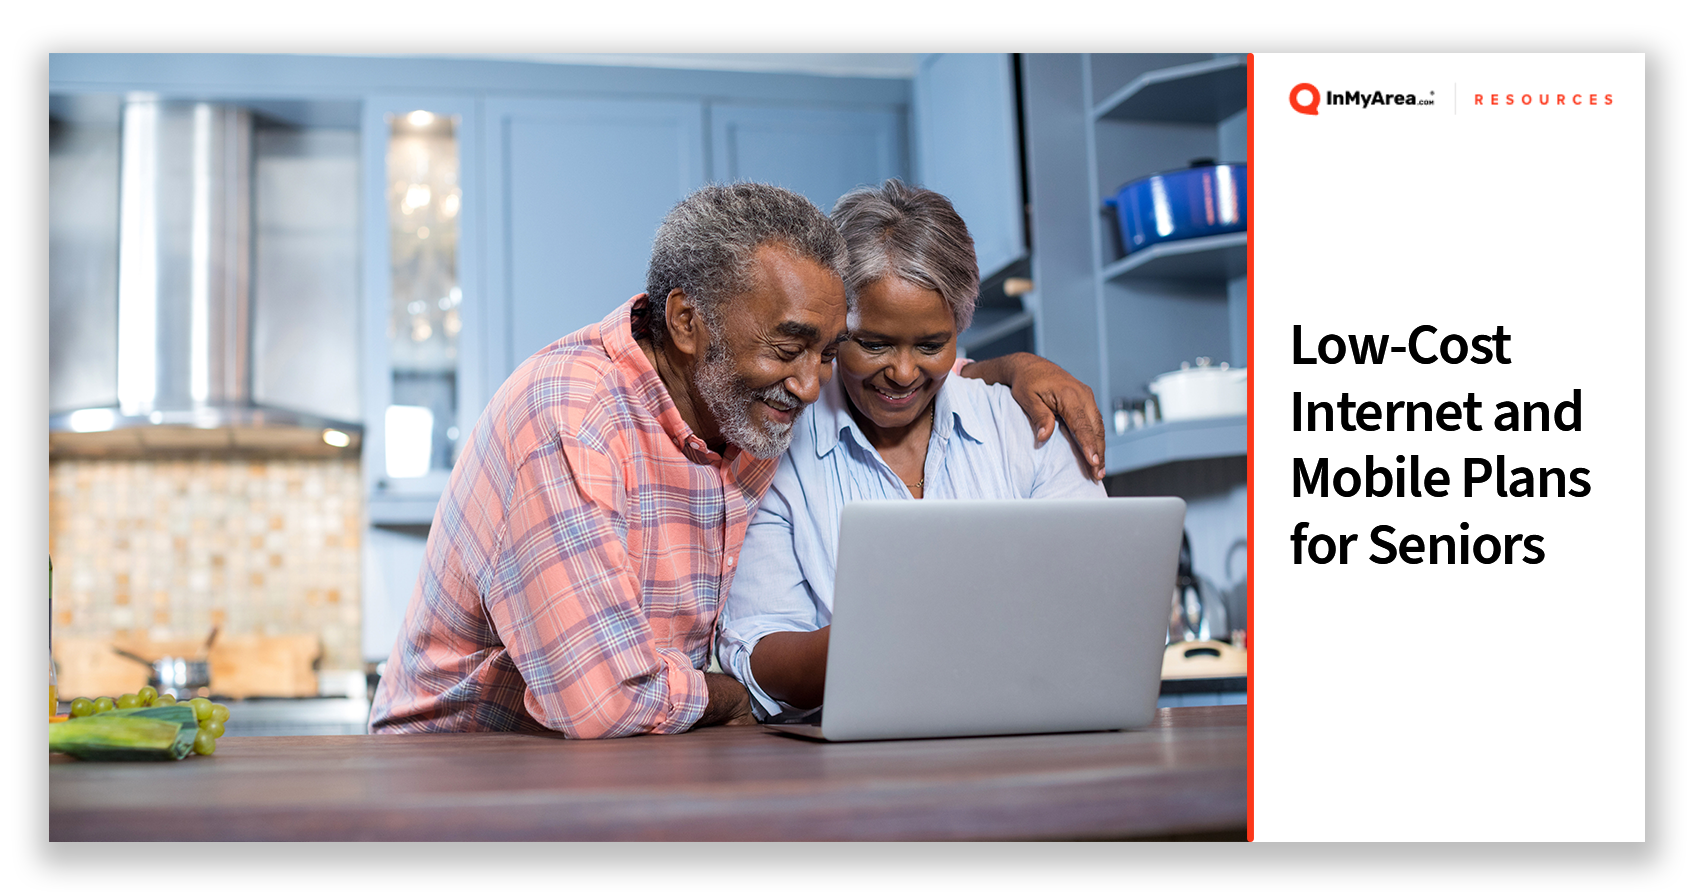 Guide For Seniors: Programs For Low-Cost Internet, Mobile Plans, And Digital Literacy